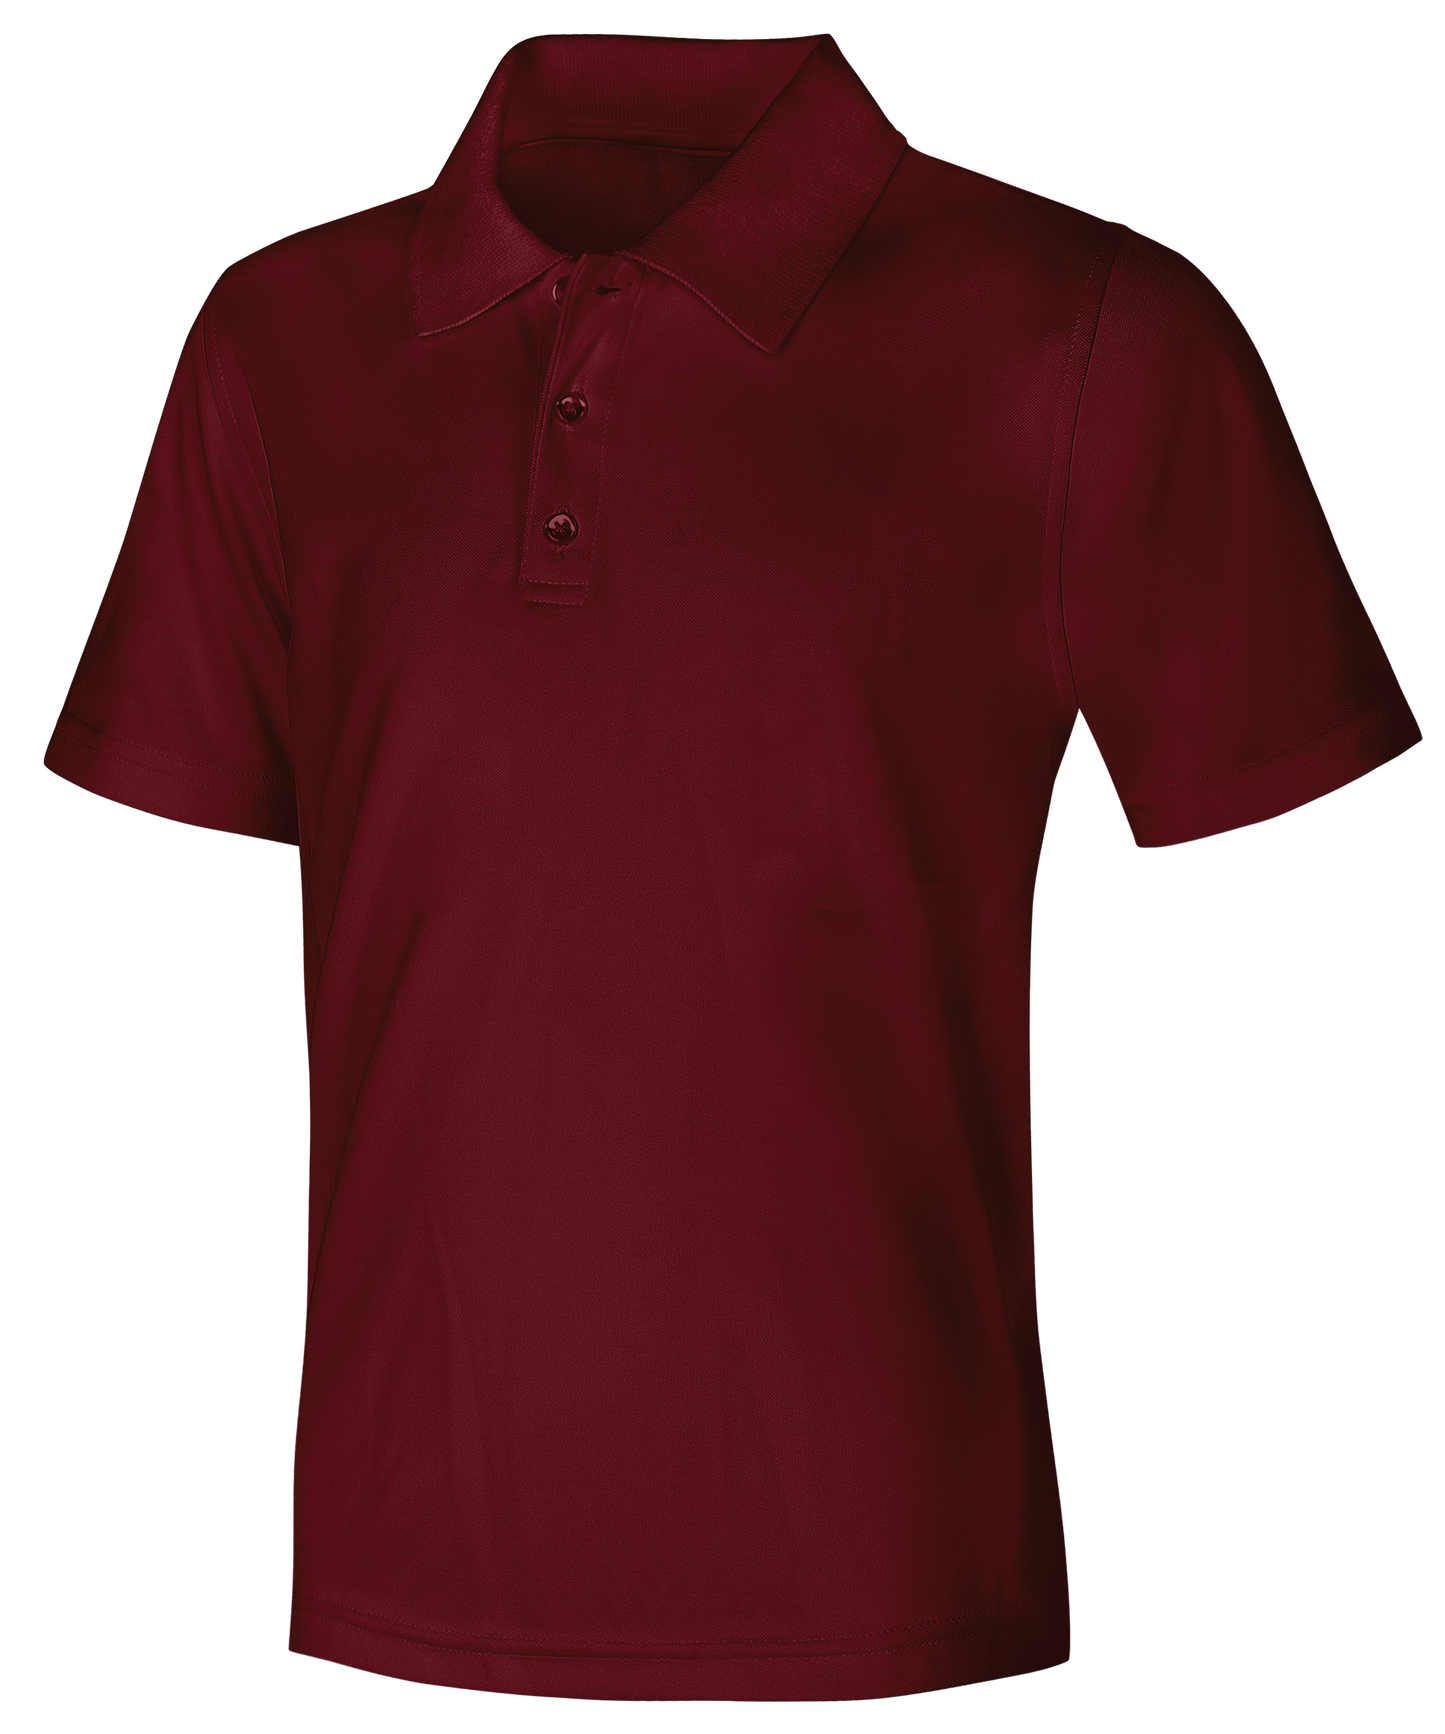 Old Fit Adult Unisex Moisture Wicking Polo